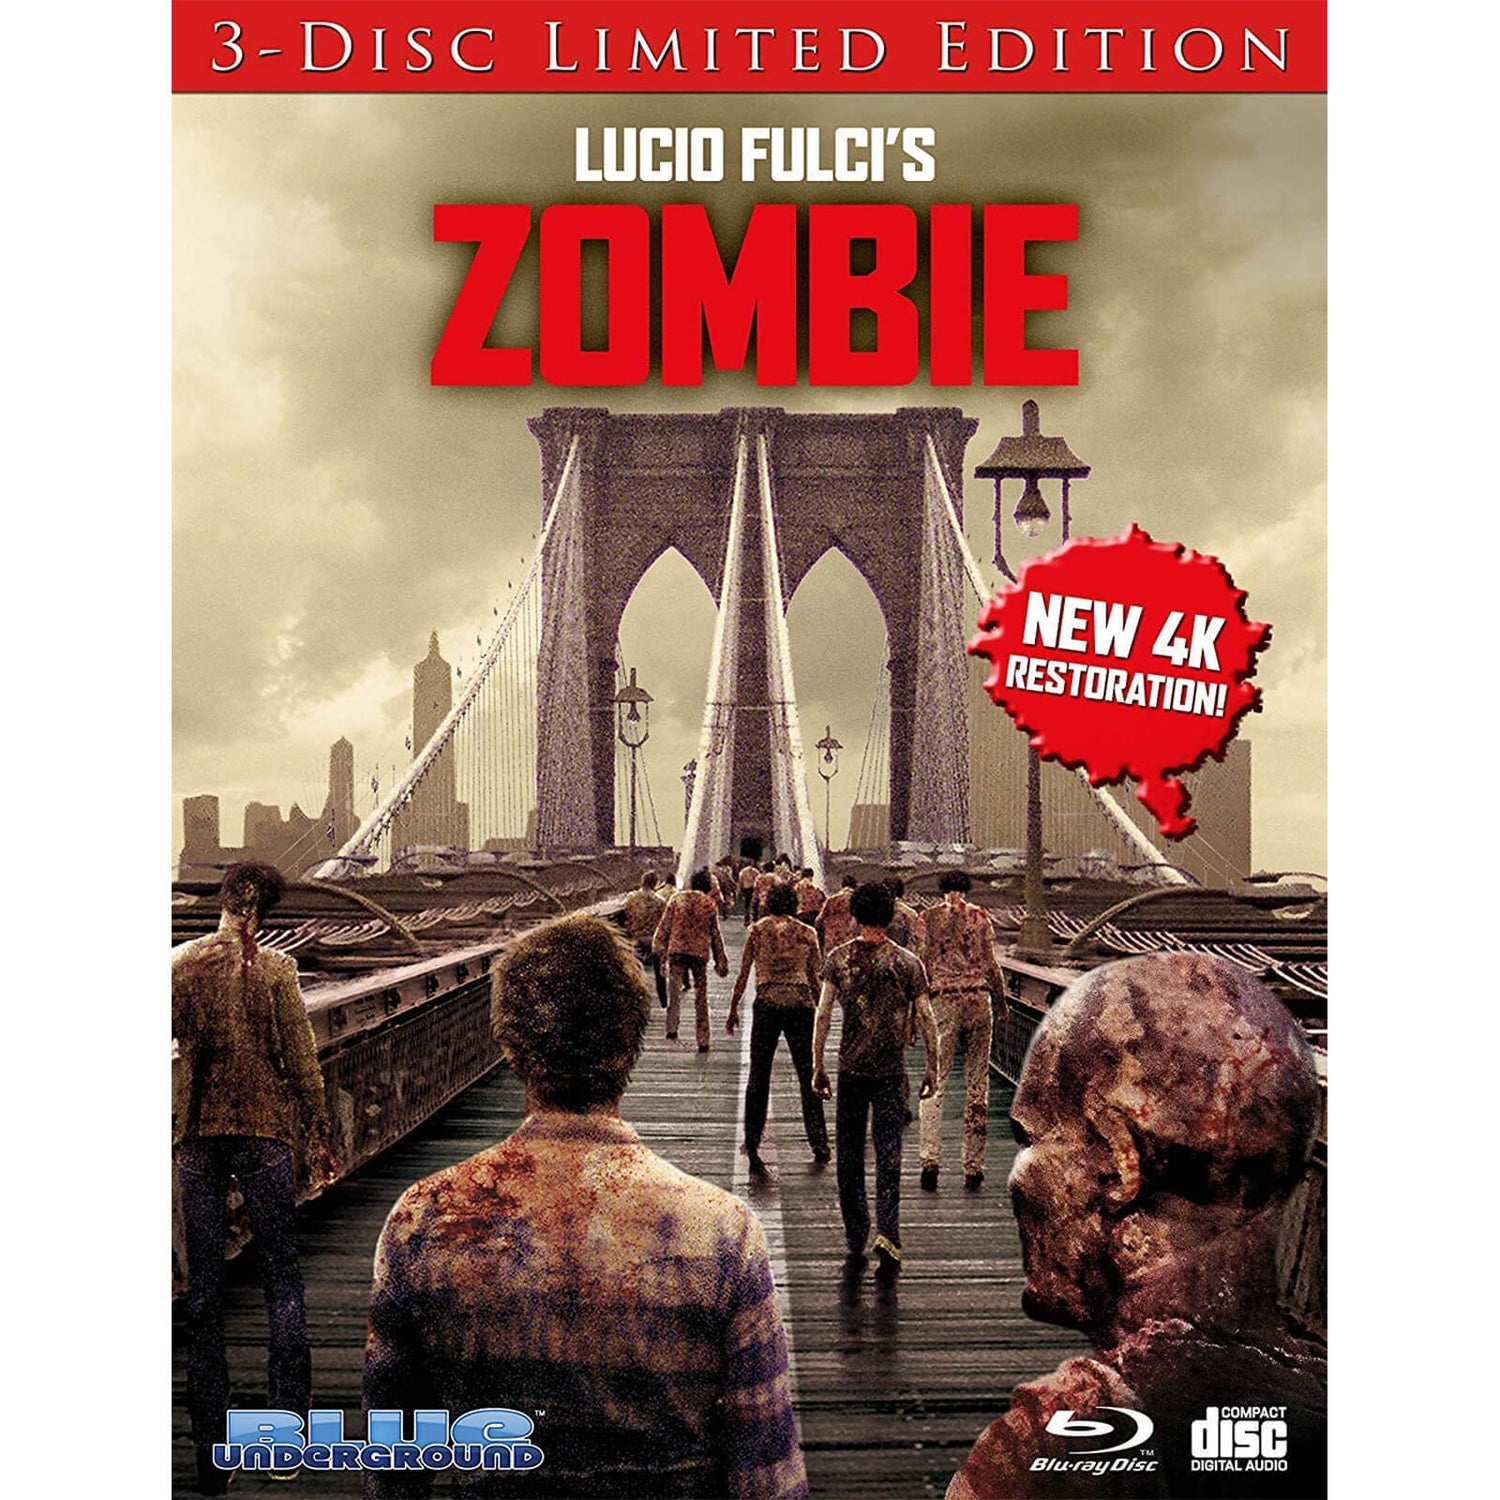 Zombie: 3-Disc Limited Edition (Bridge Cover) (Includes CD)